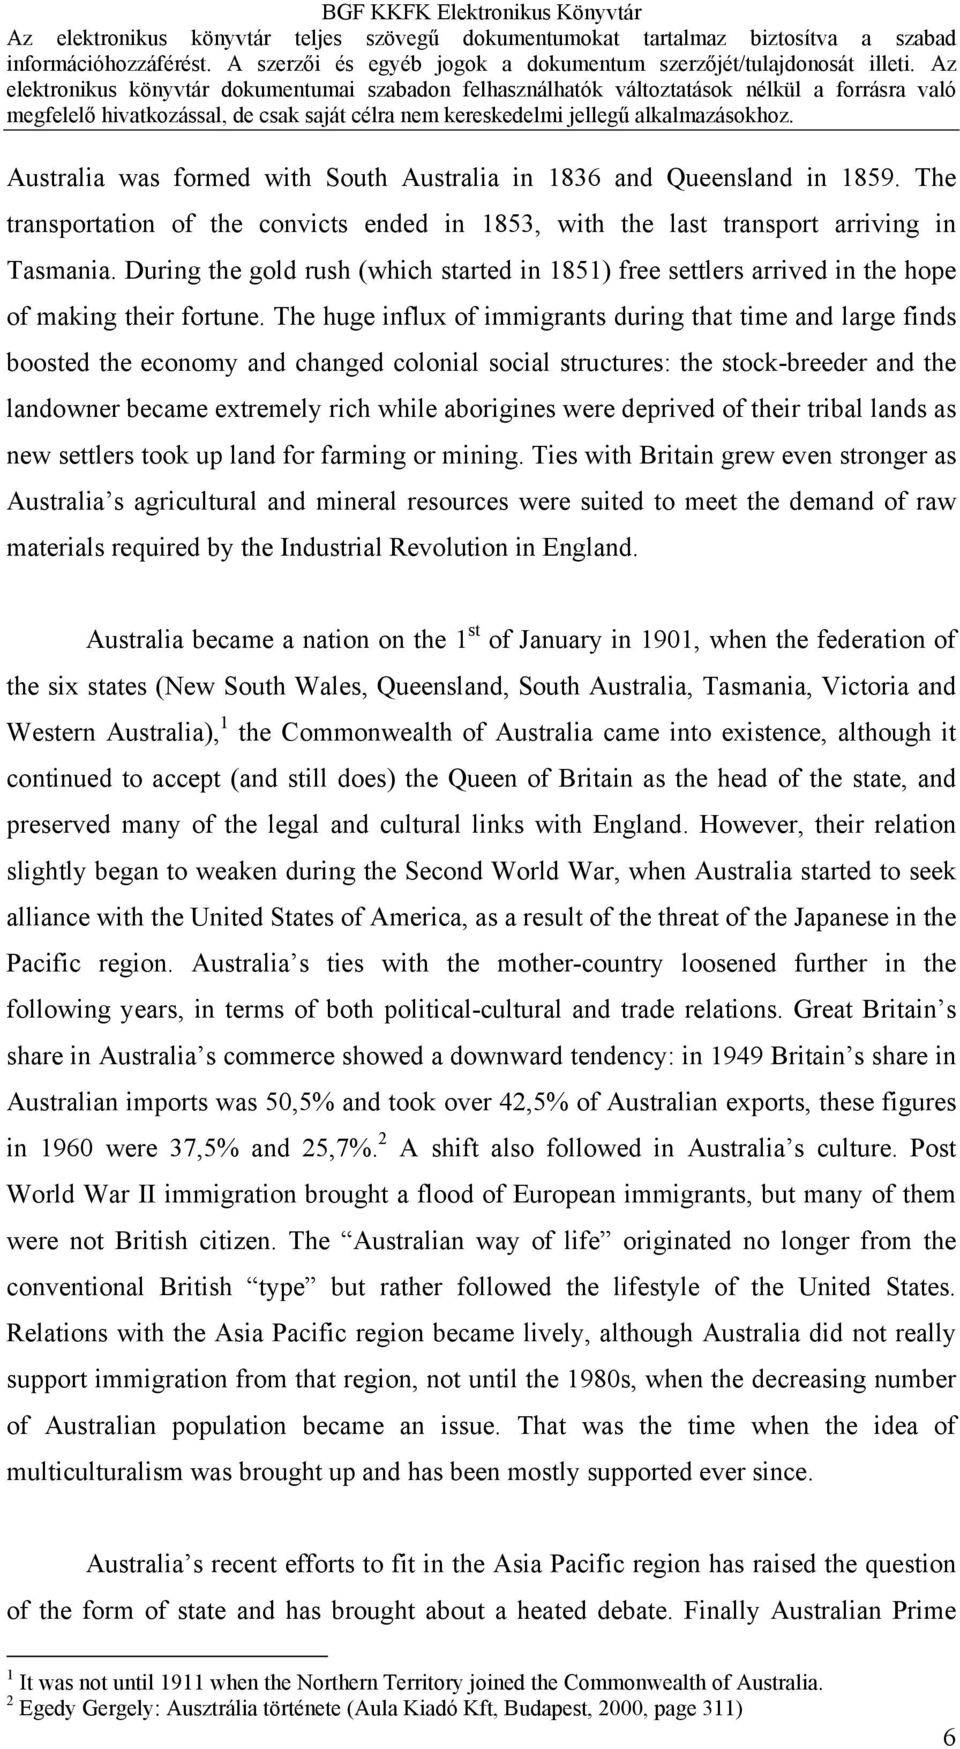 The huge influx of immigrants during that time and large finds boosted the economy and changed colonial social structures: the stock-breeder and the landowner became extremely rich while aborigines